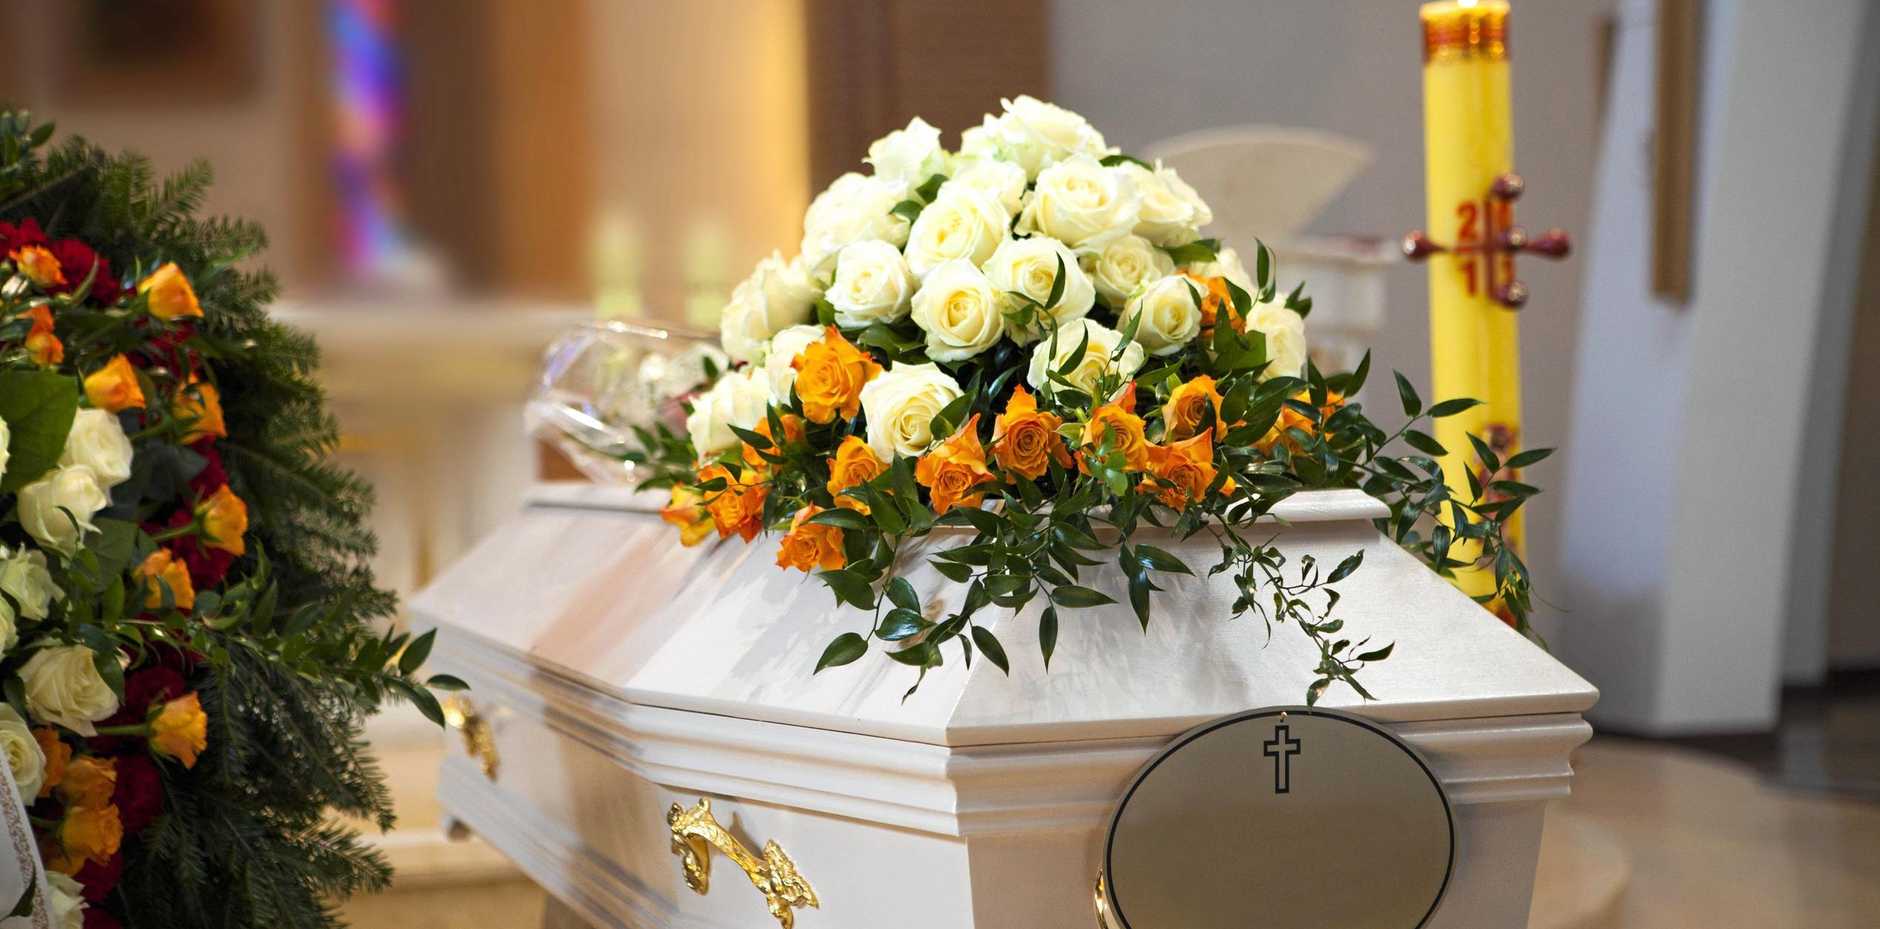 Funeral Planning: A Guide to Working With a Funeral Director